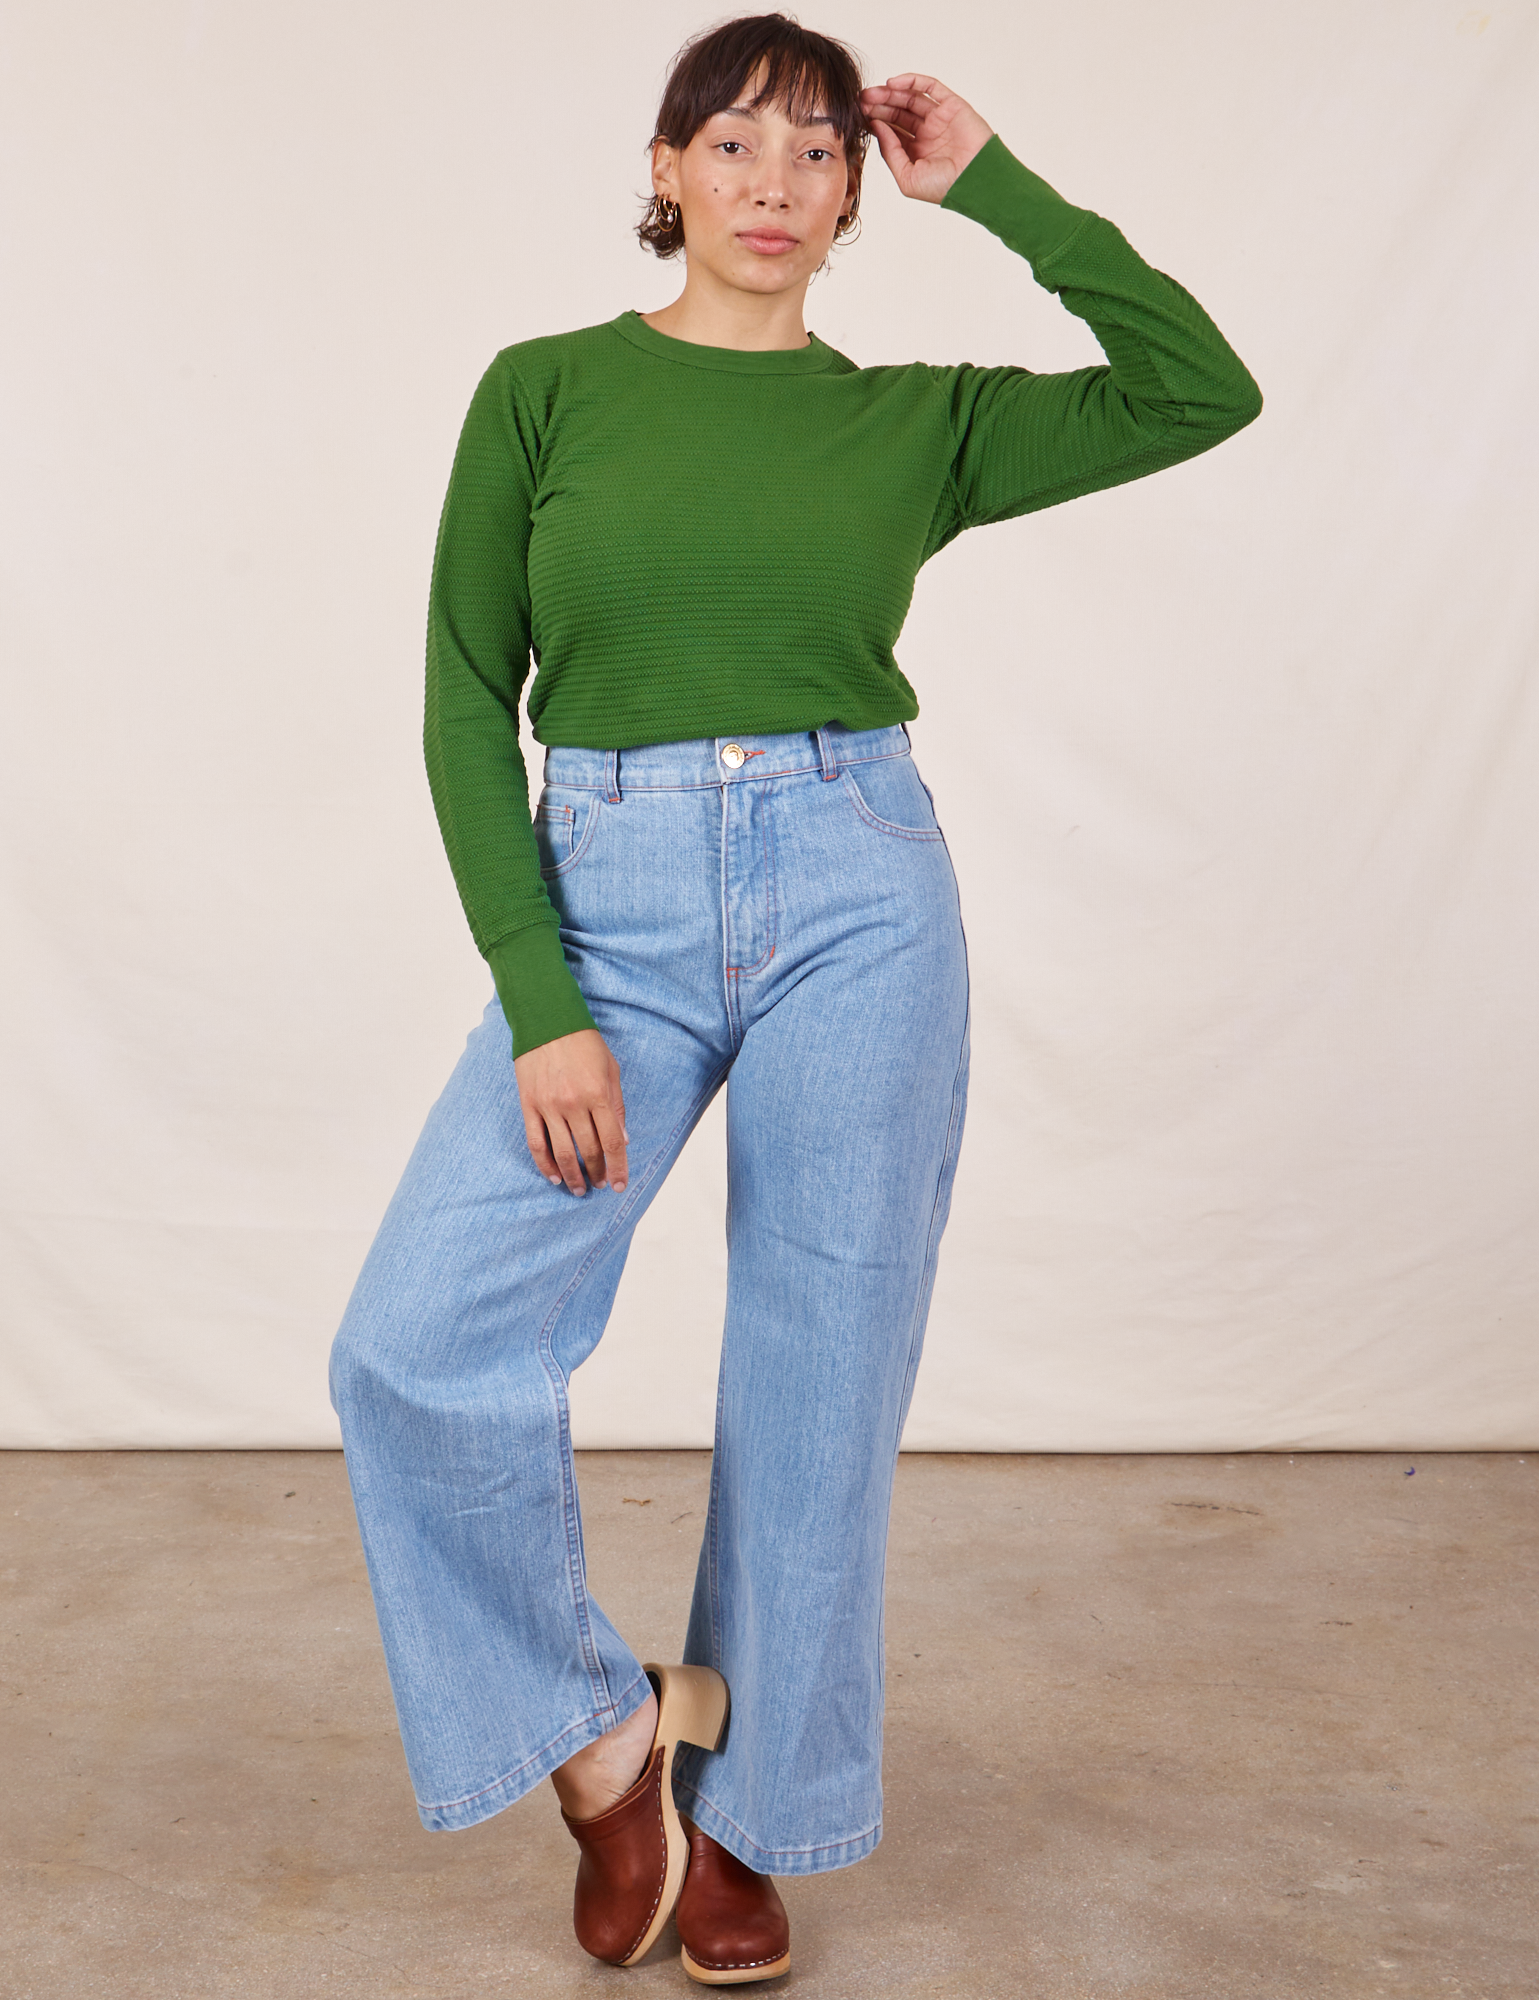 Tiara is wearing Honeycomb Thermal in Lawn Green tucked into light wash Sailor Jeans